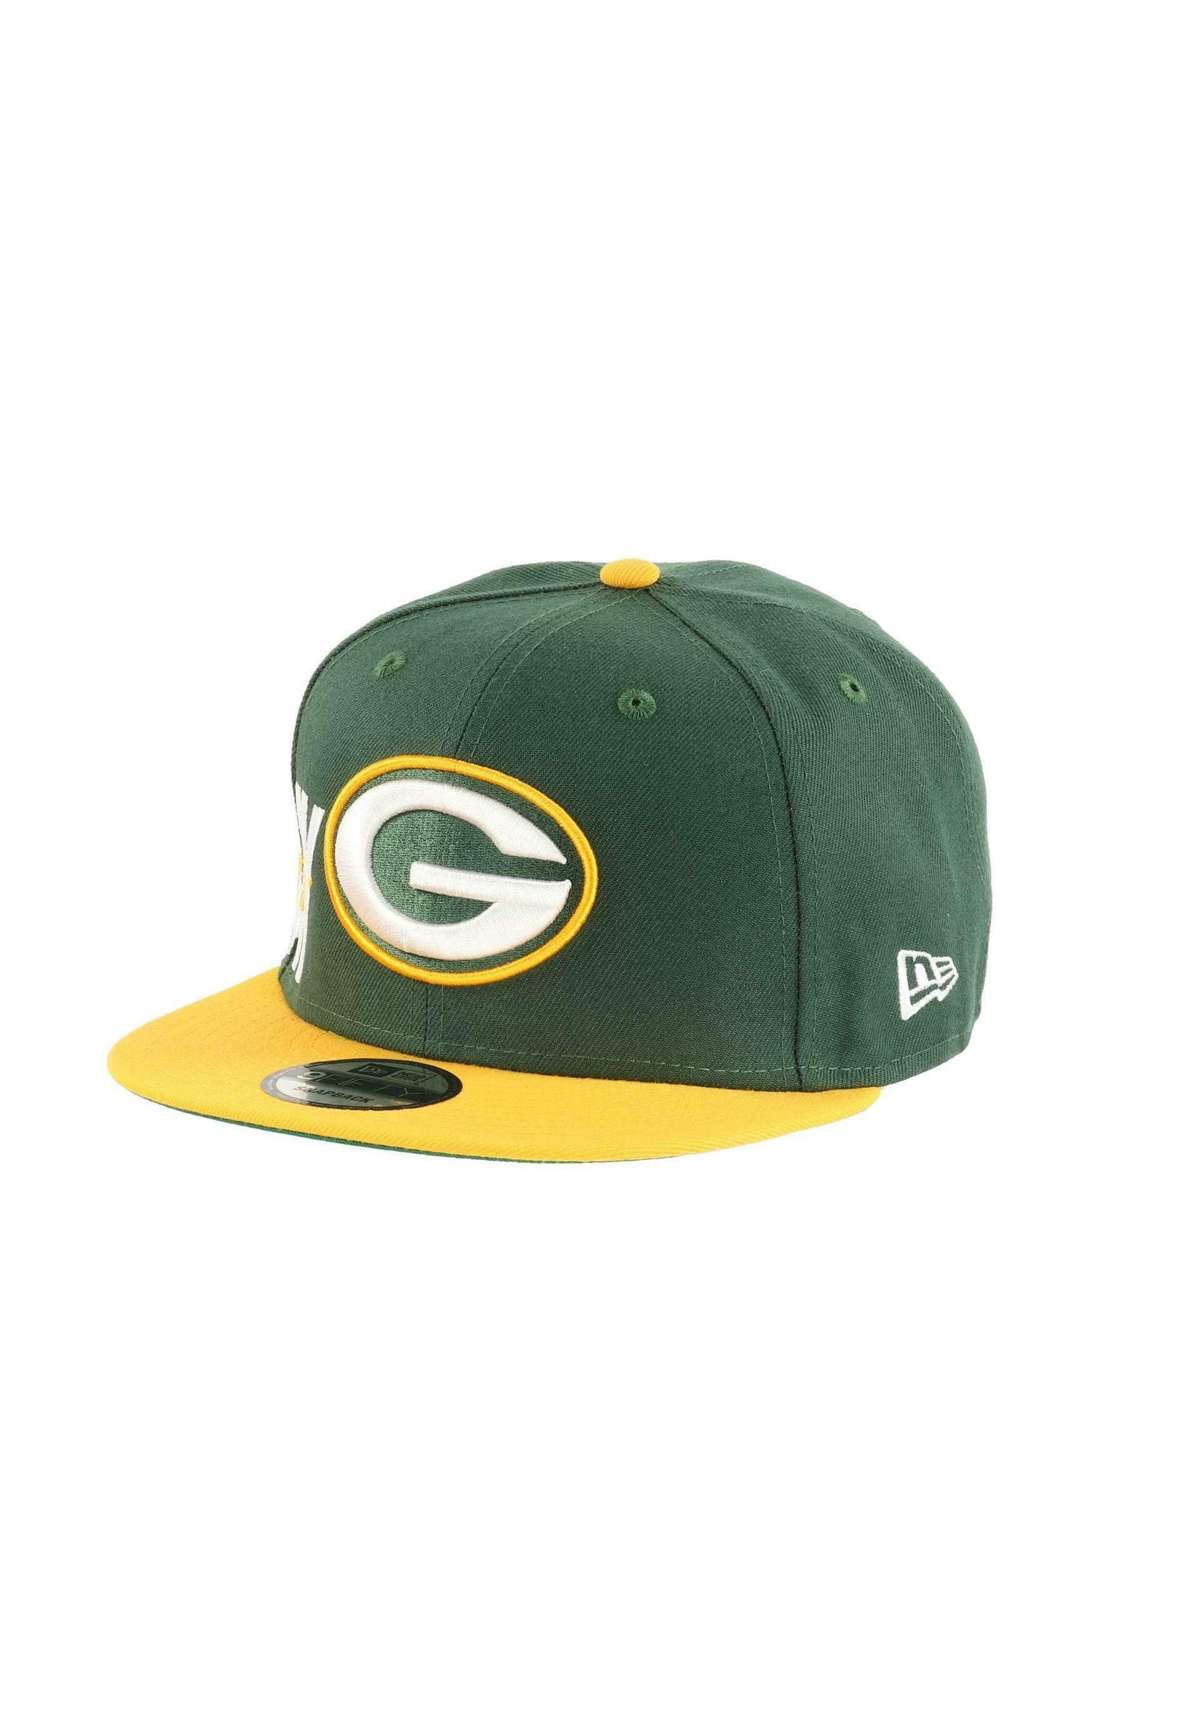 Кепка GREEN BAY PACKERS SIDEFONT GREEN / YELLOW 9FIFTY SNAPBACK